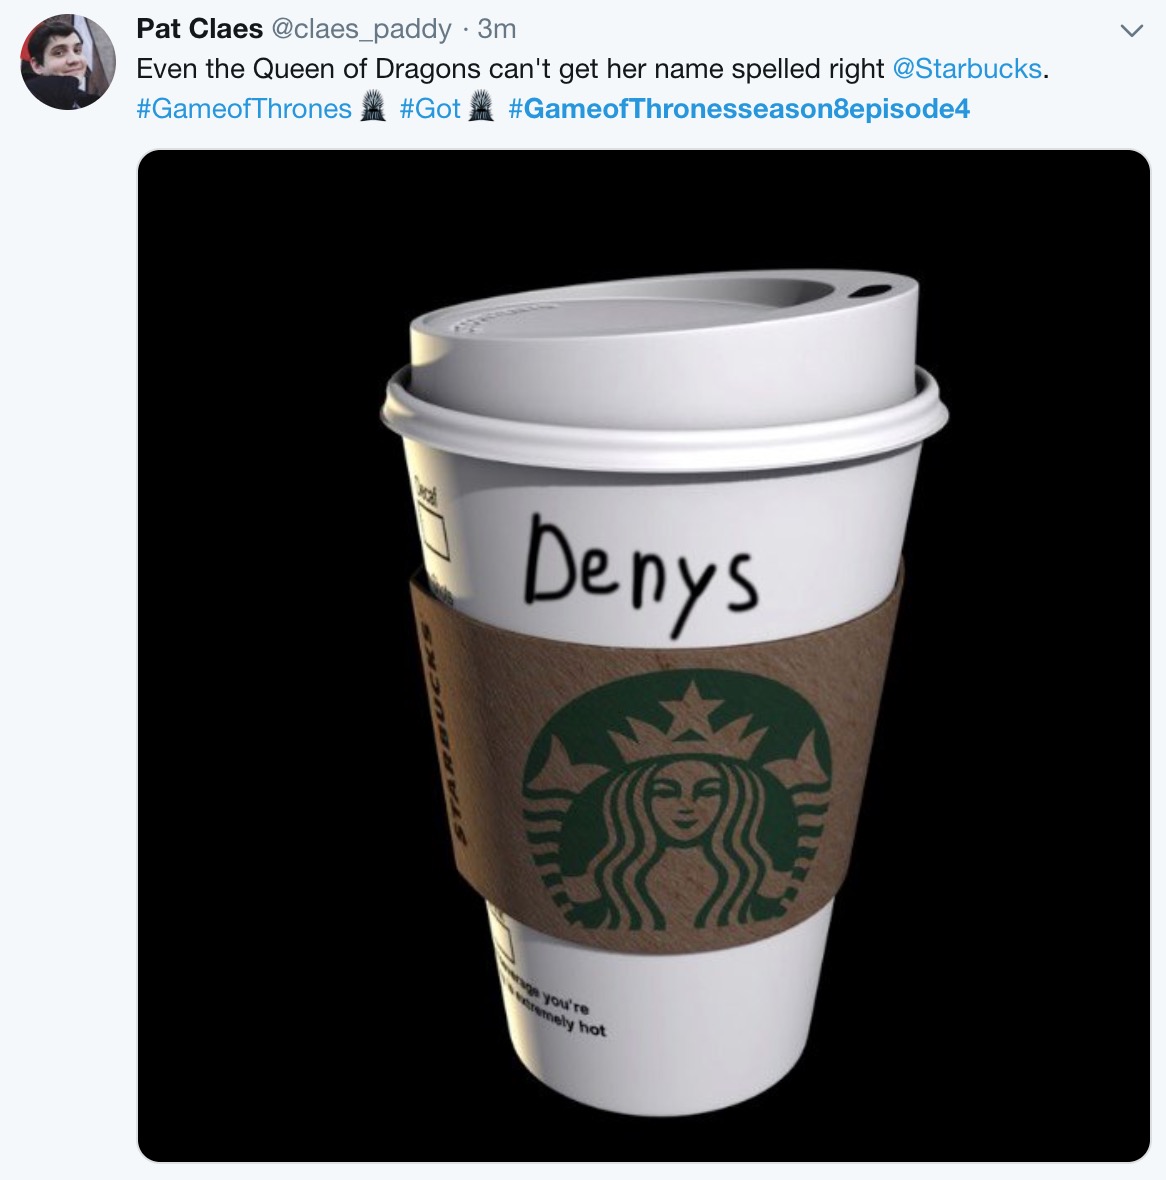 Game of Thrones Season 8 Episode 4 meme - not even dany can get her name right on a starbucks cup